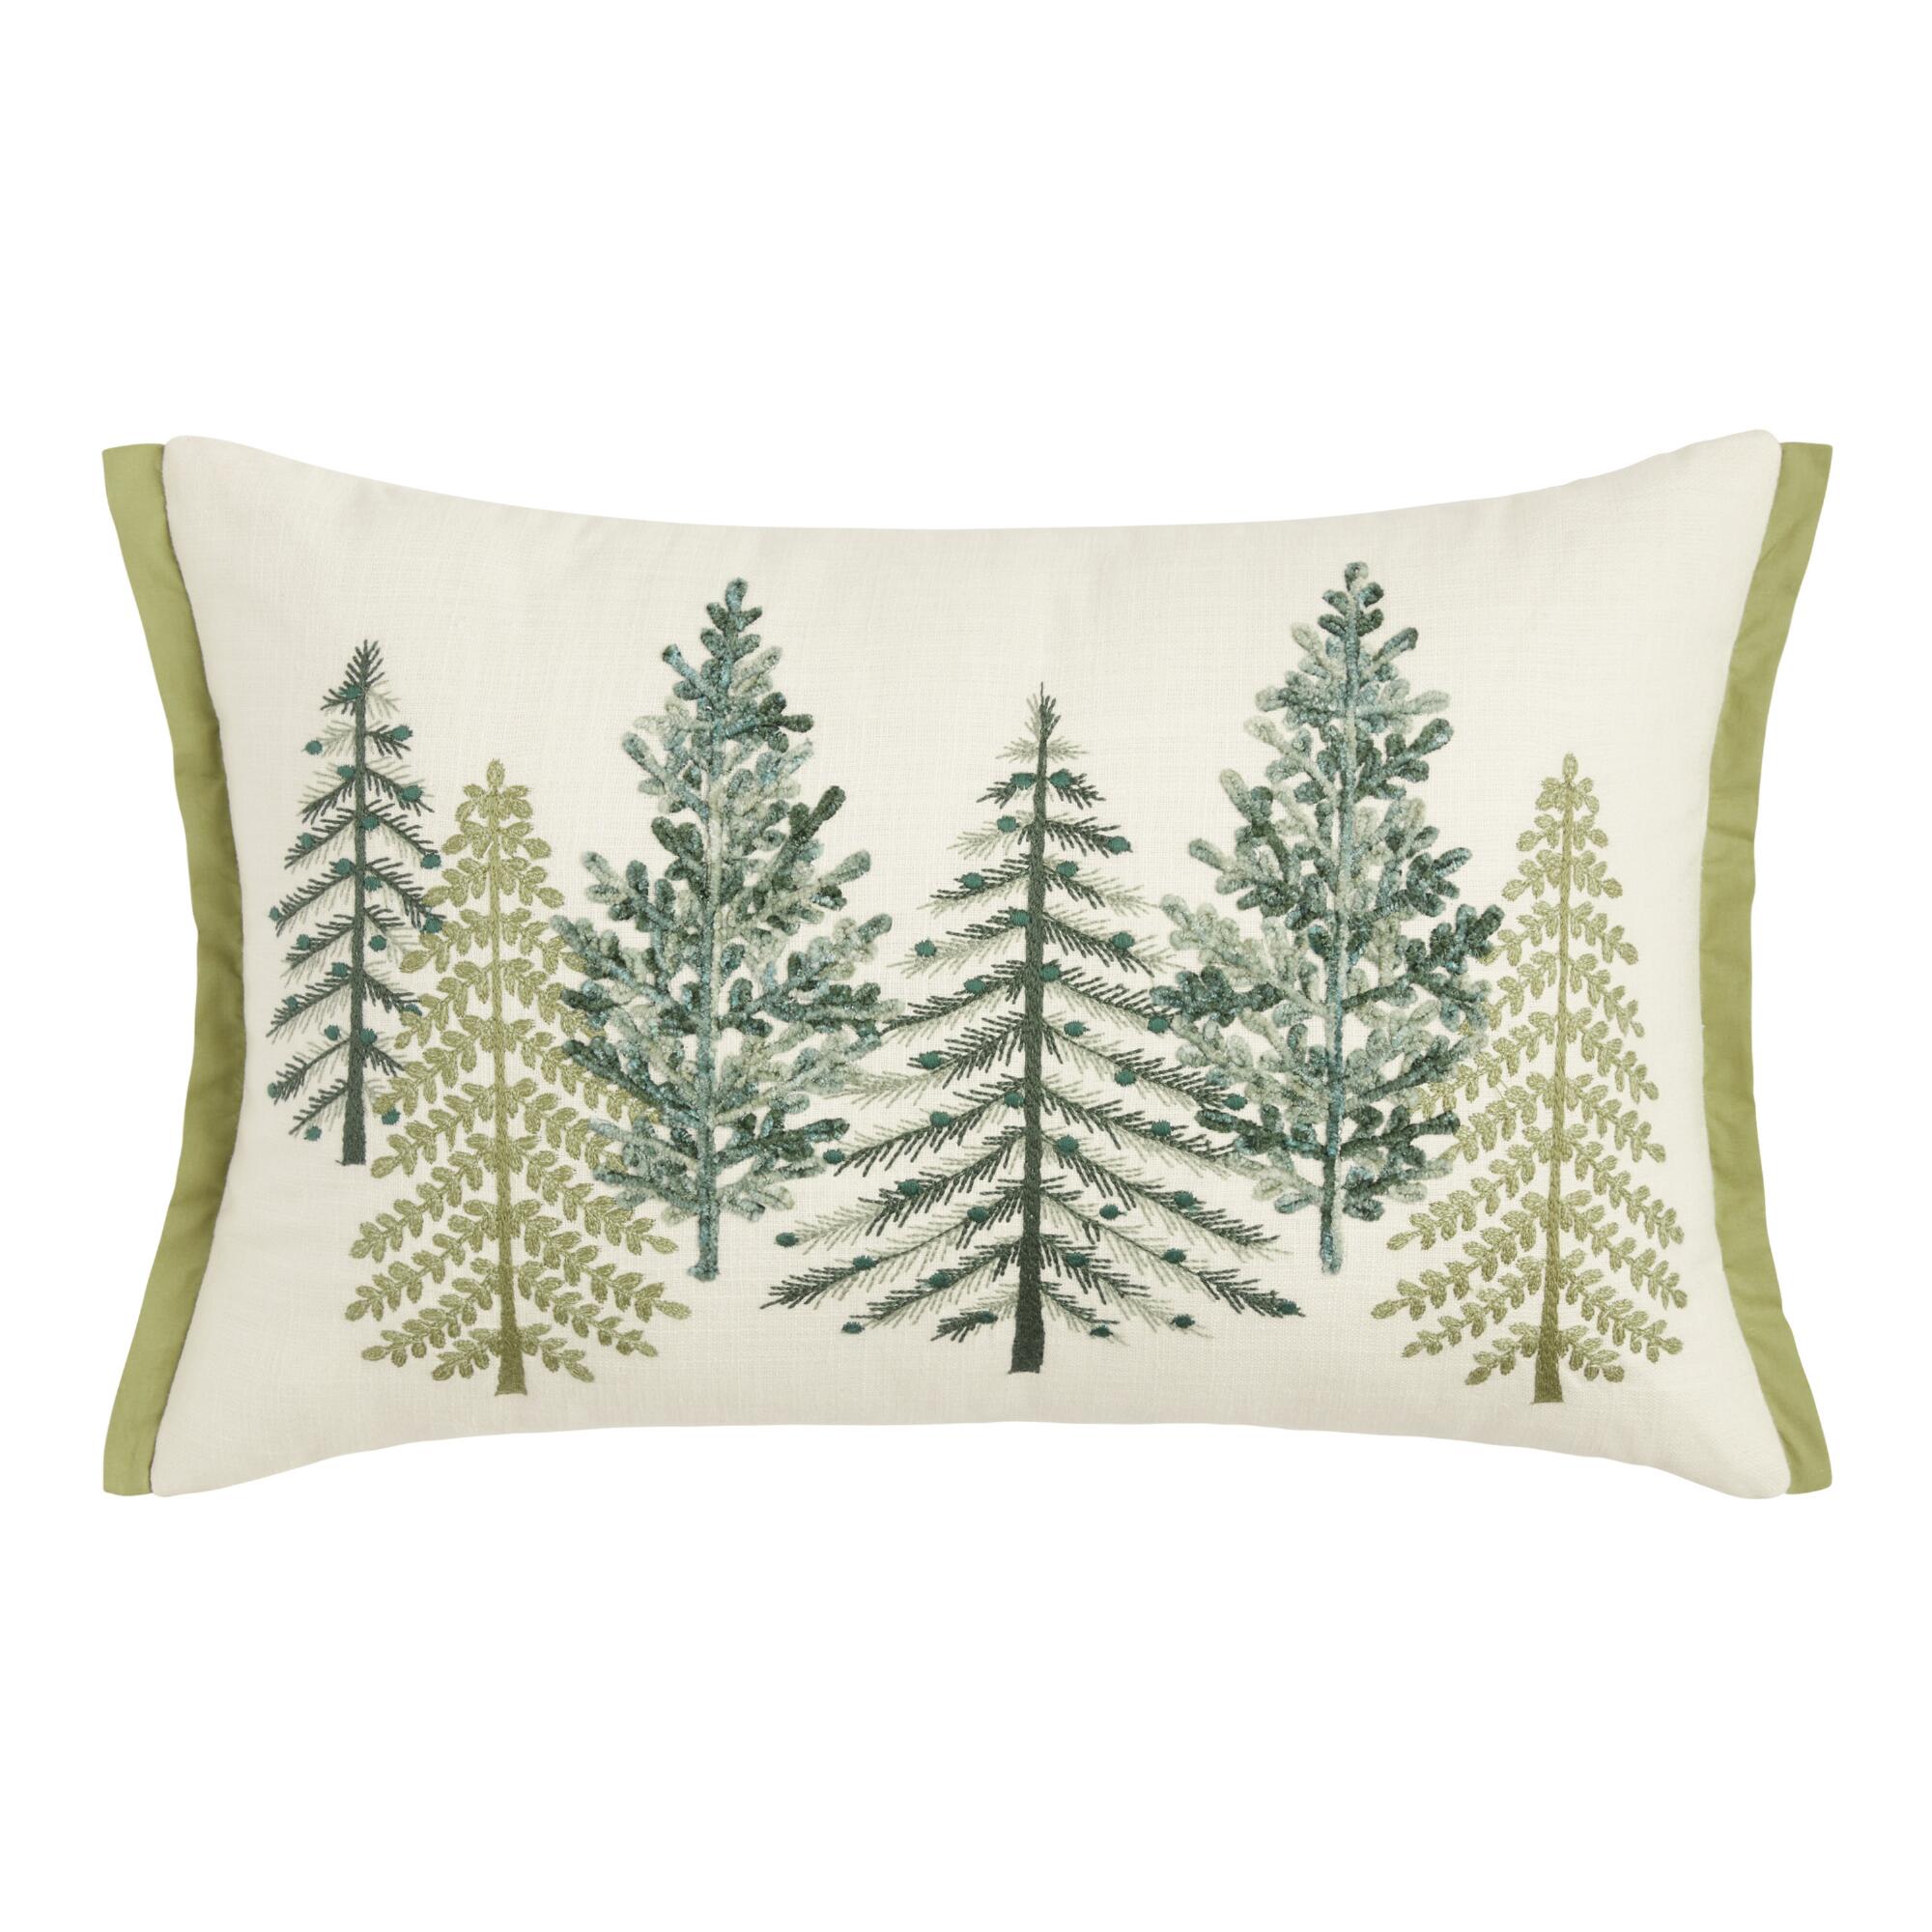 Pier Place Spruce Green Winter Trees Beaded Lumbar Pillow: Green/White - Cotton by World Market